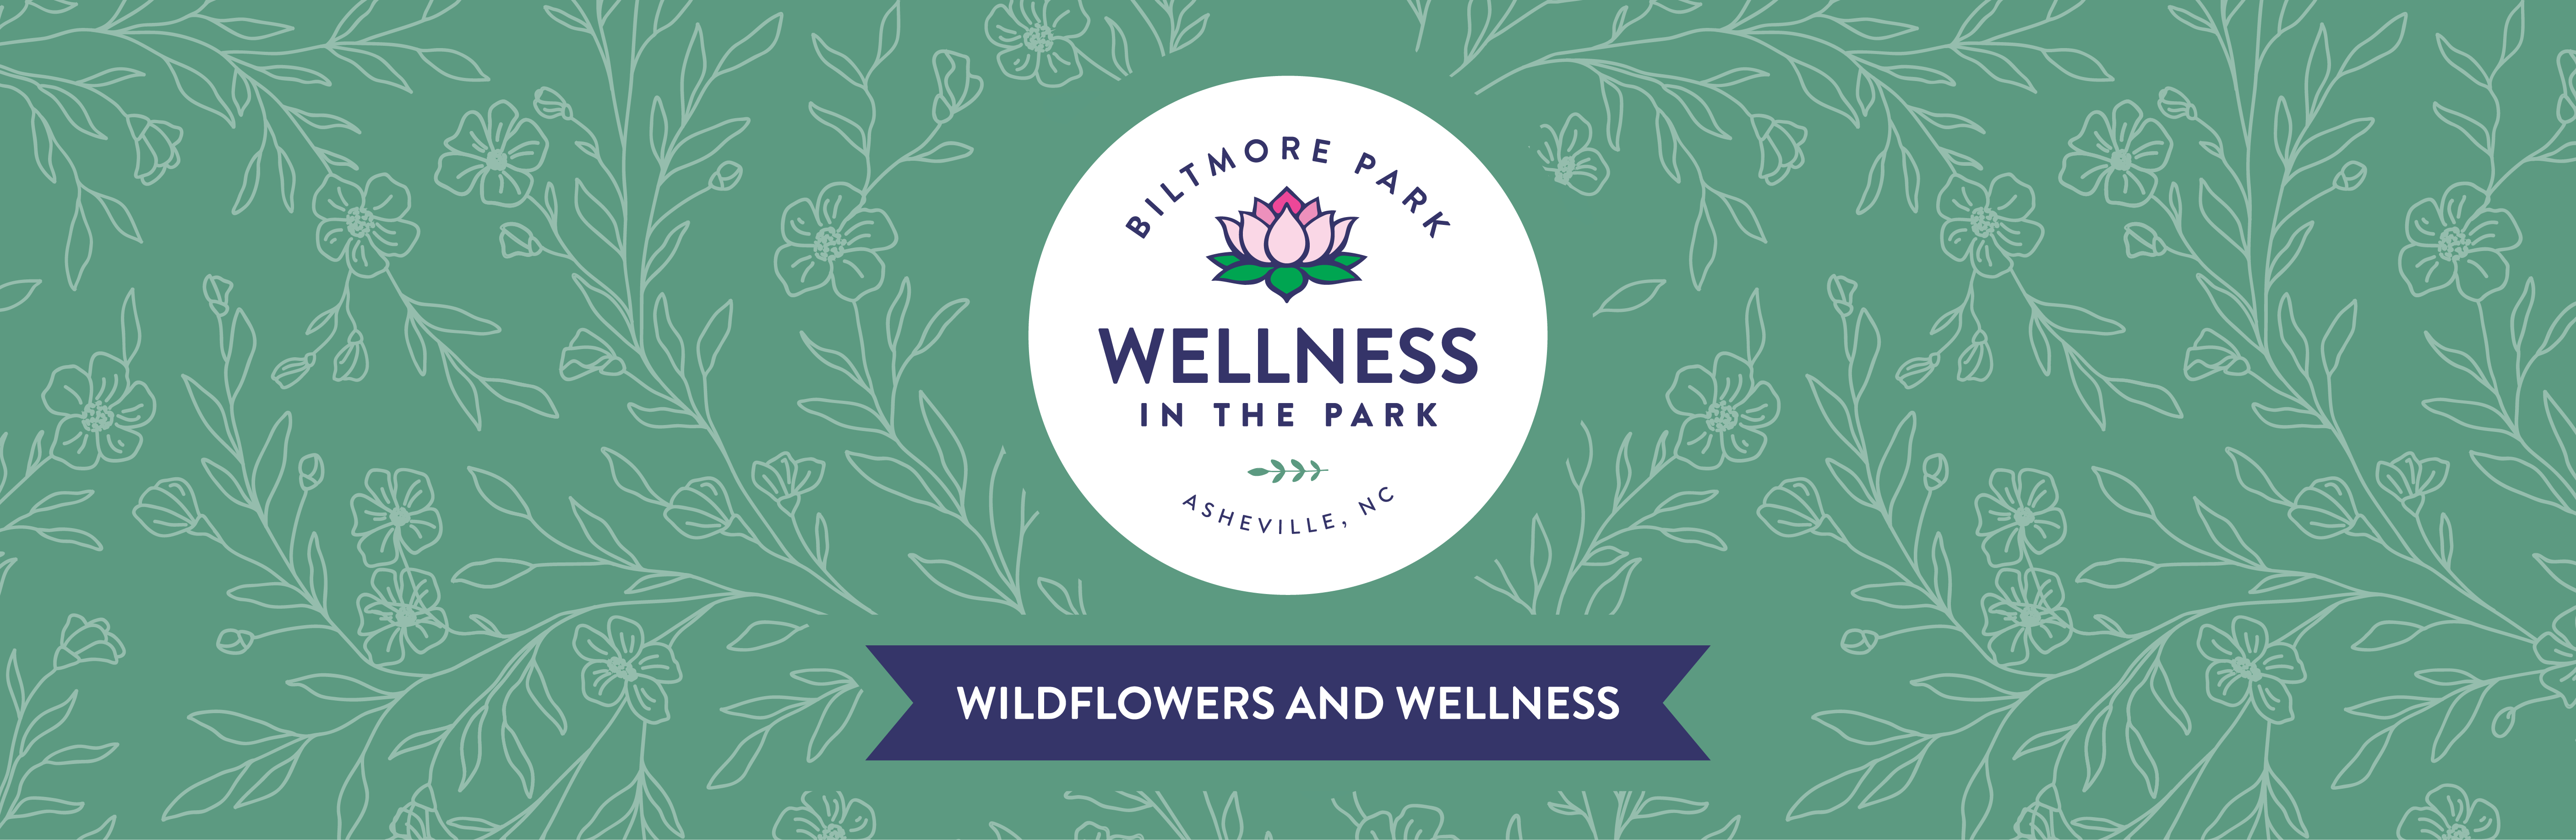 BP-Wellness-In-The-Park-LinkedIn-Cover-with-Ribbon